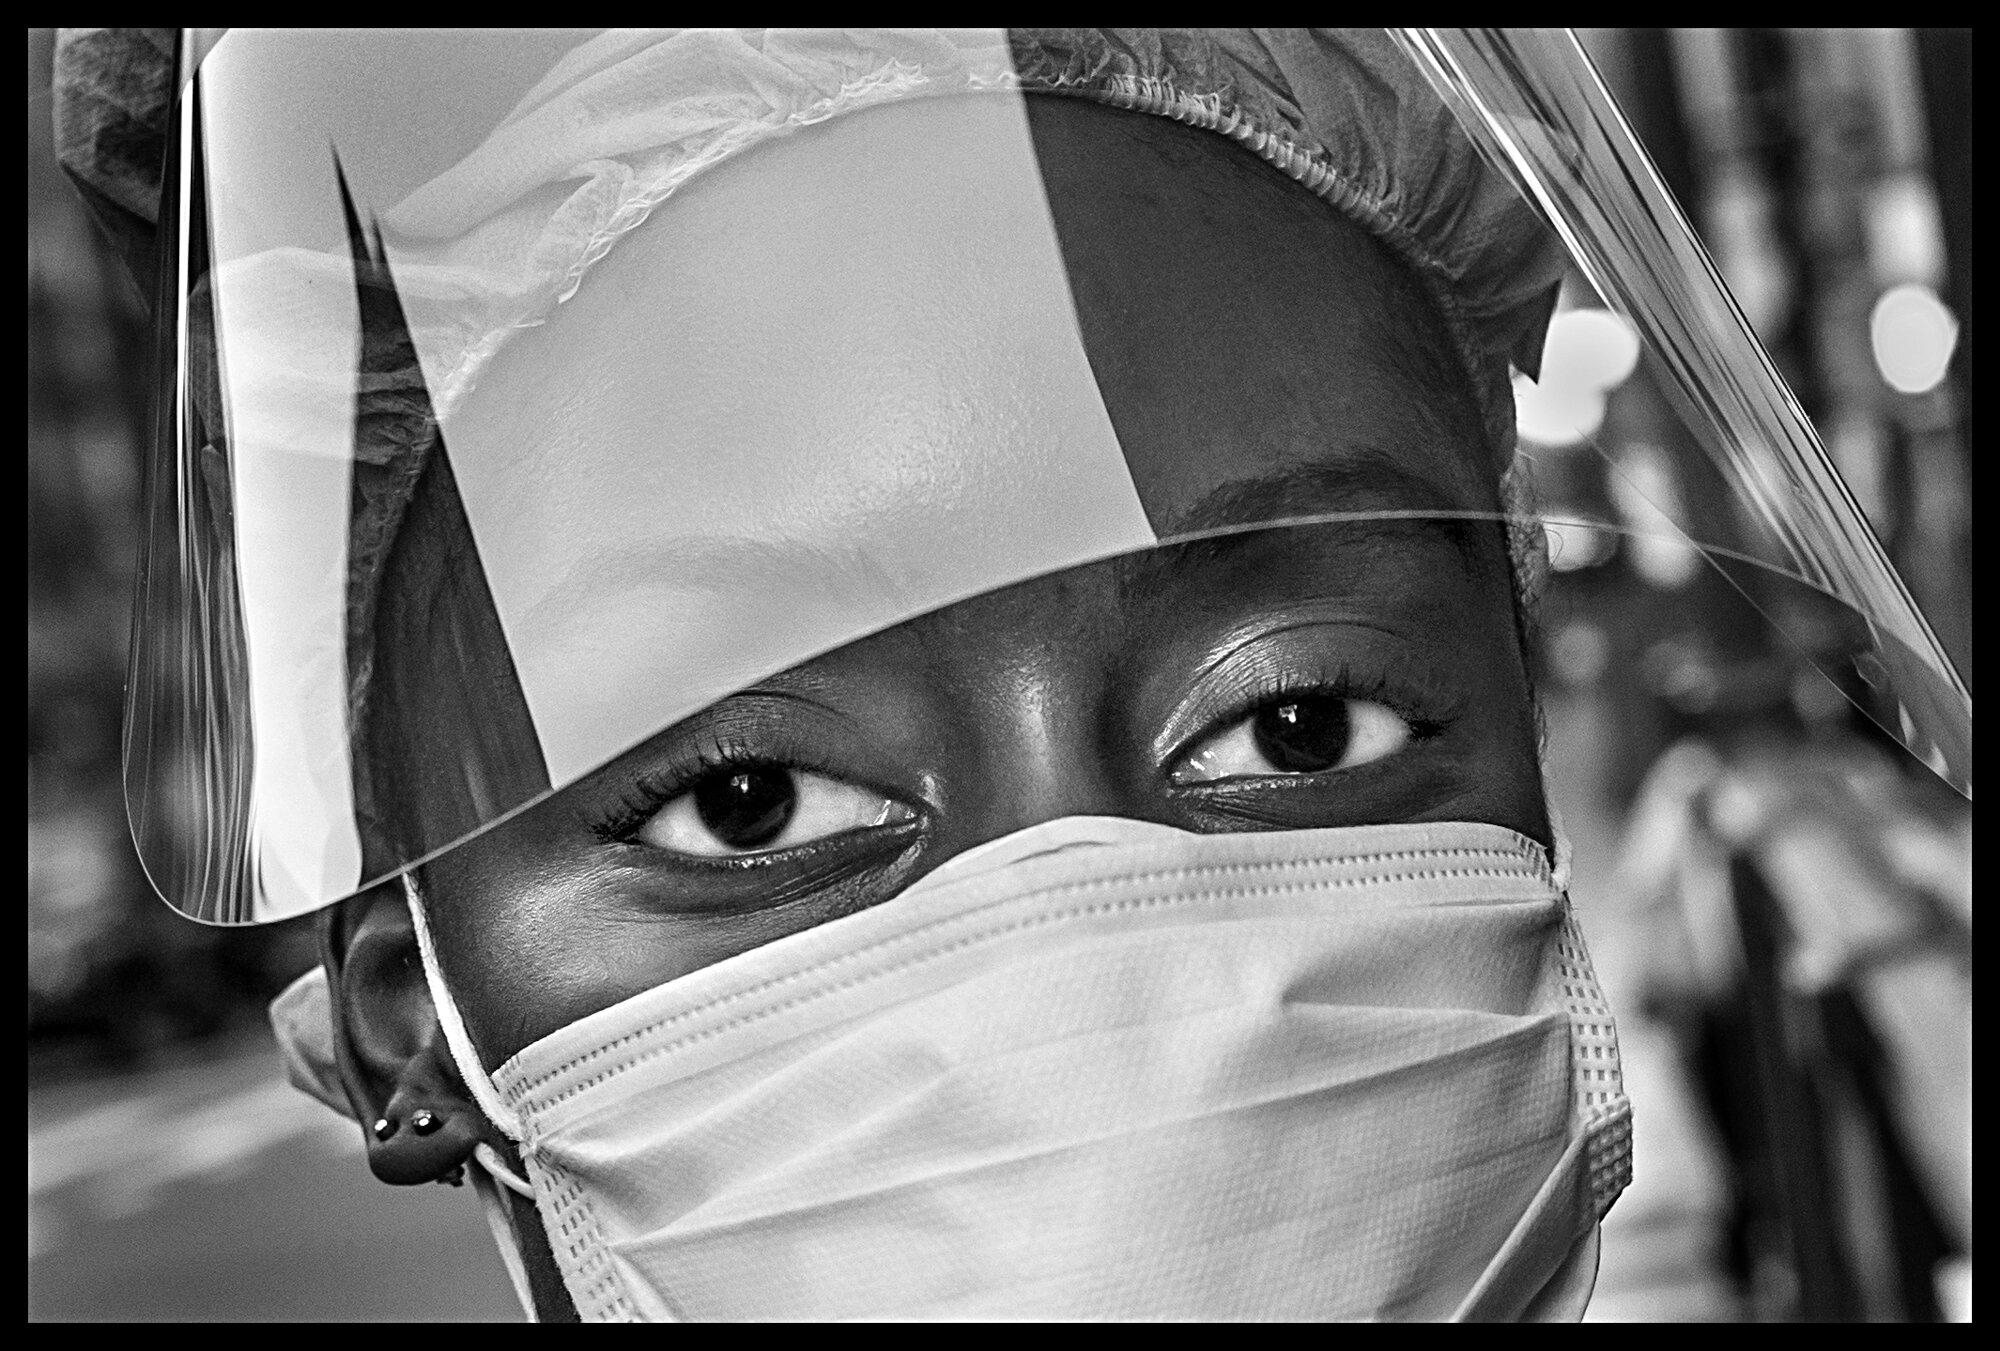  Shannone, 26, works with Covid-19 patients at Lenox Hill Hospital.   May 2, 2020. © Peter Turnley.   ID# 31-001 